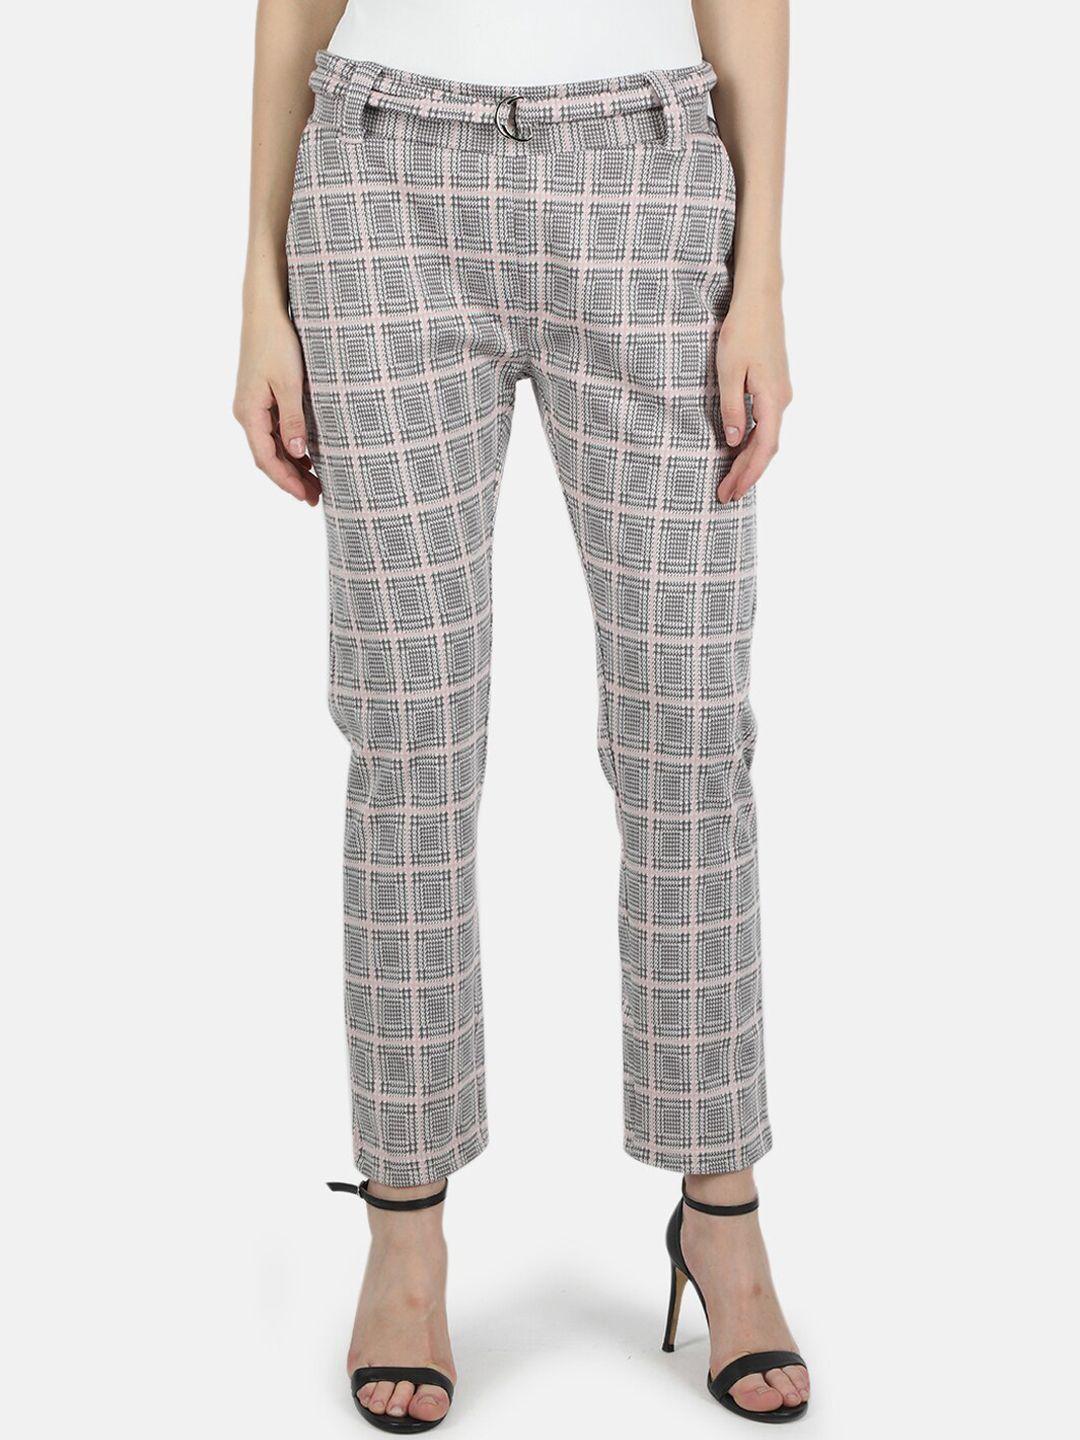 monte carlo women pink printed trousers